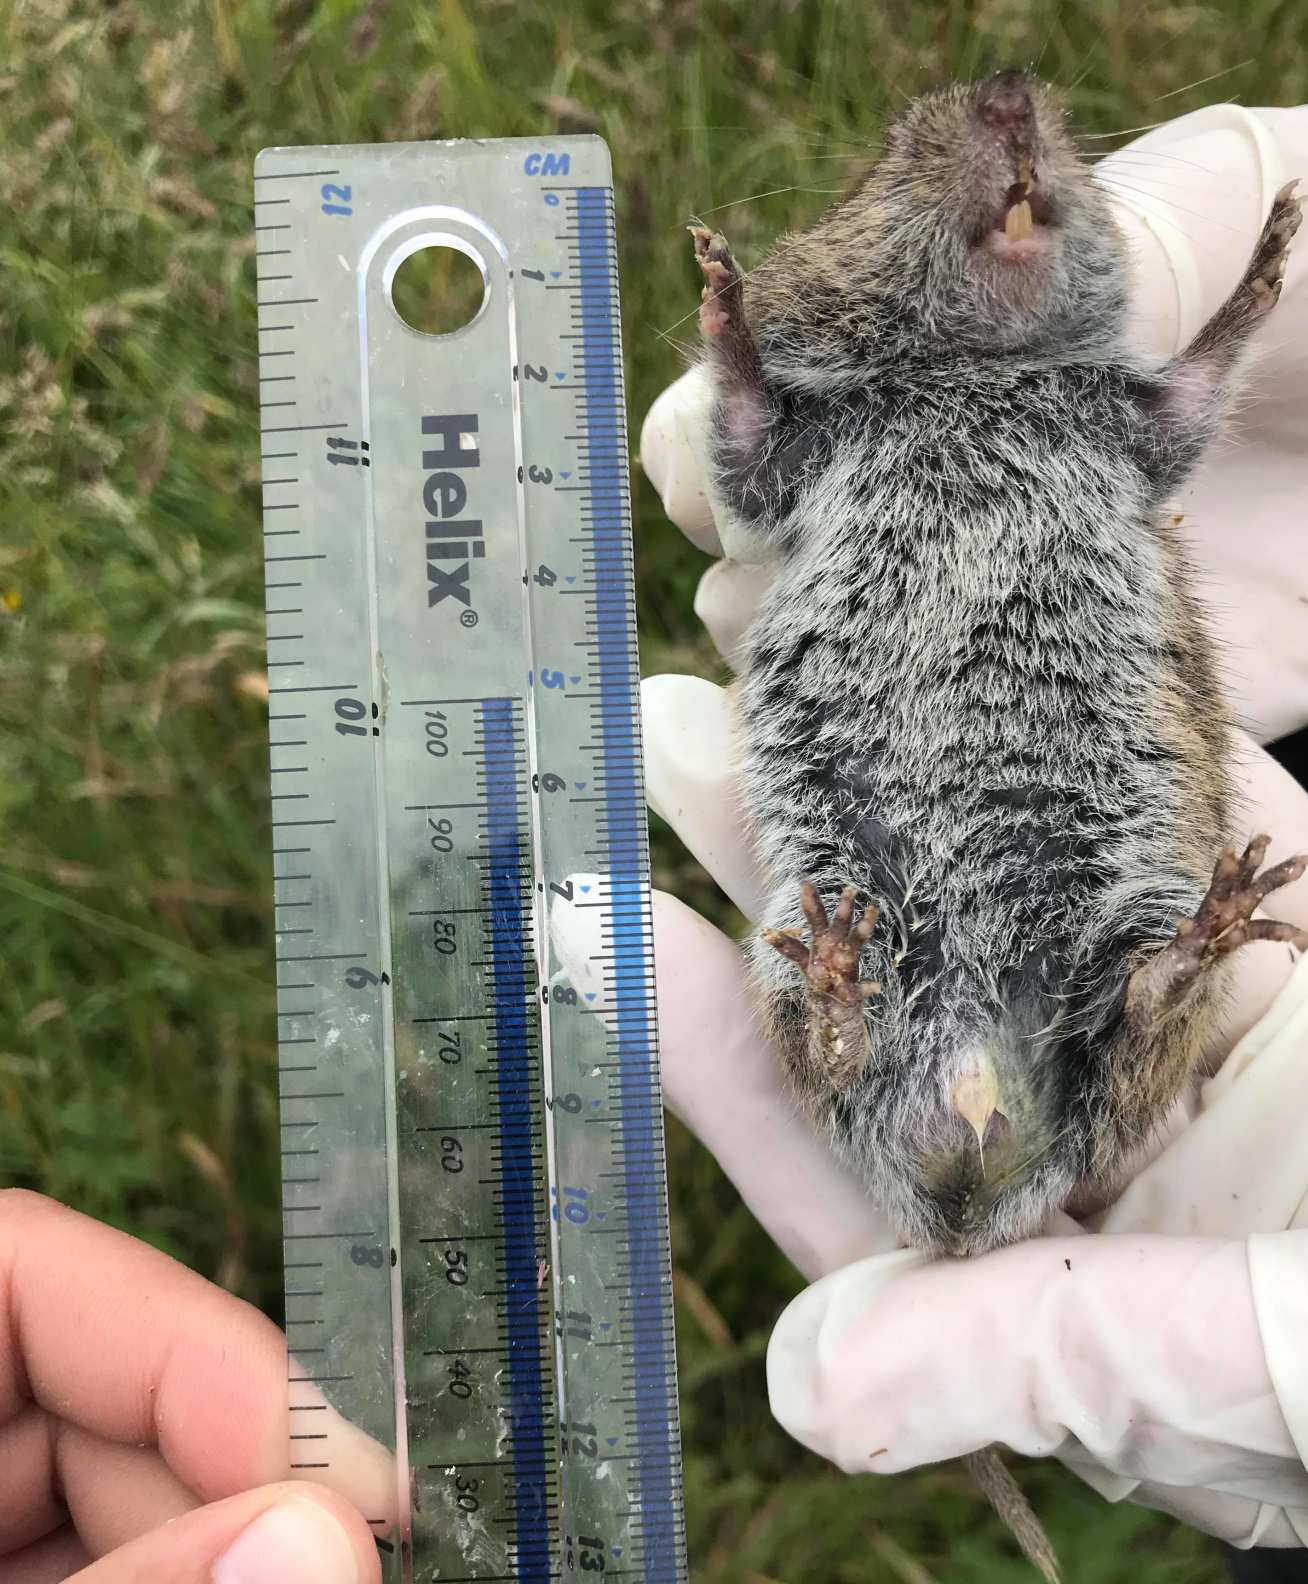 A giant vole being measured